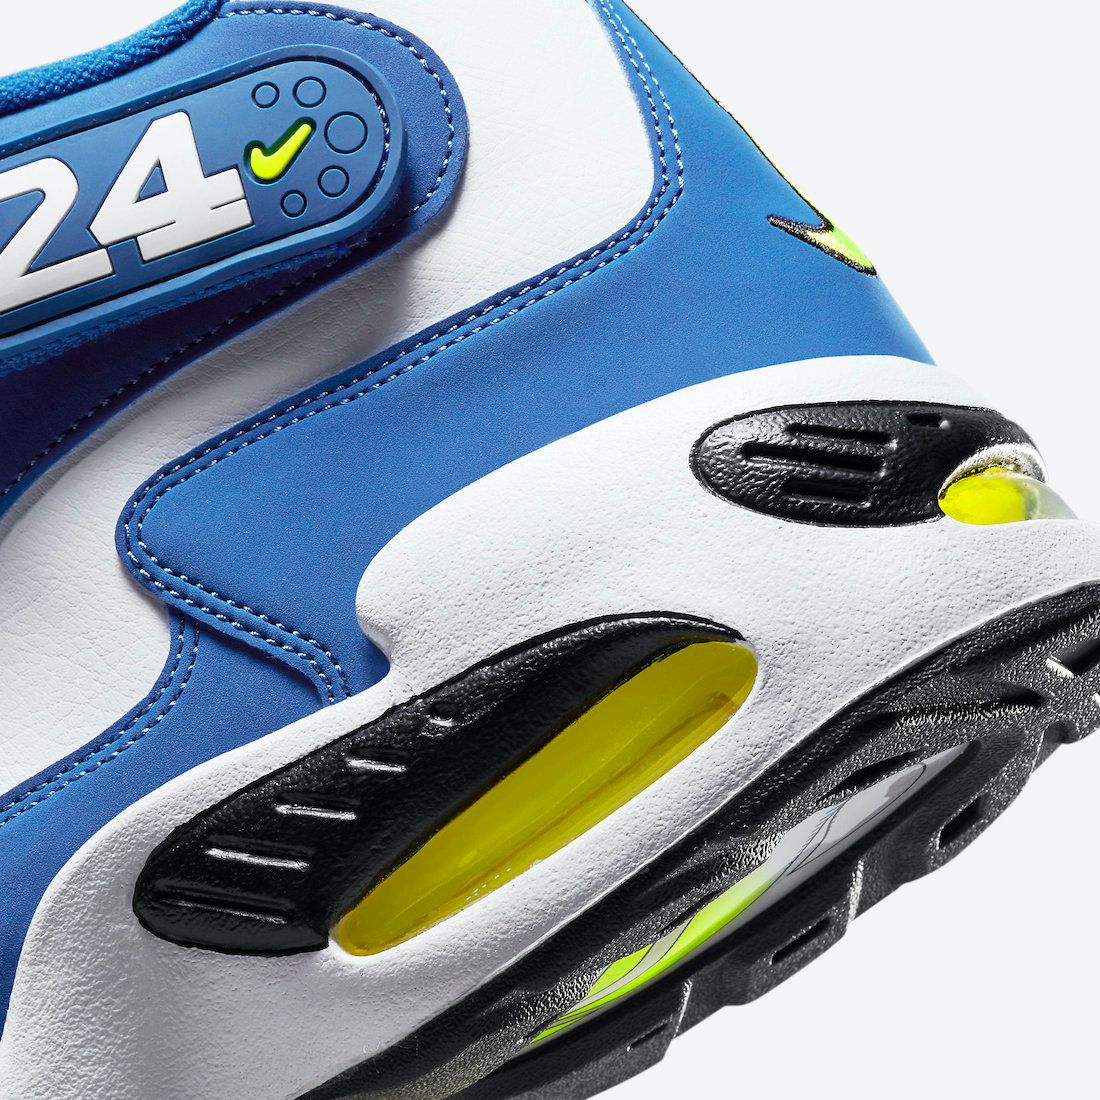 Nike Air Griffey Max 1 'Varsity Royal' 2021 official on white 